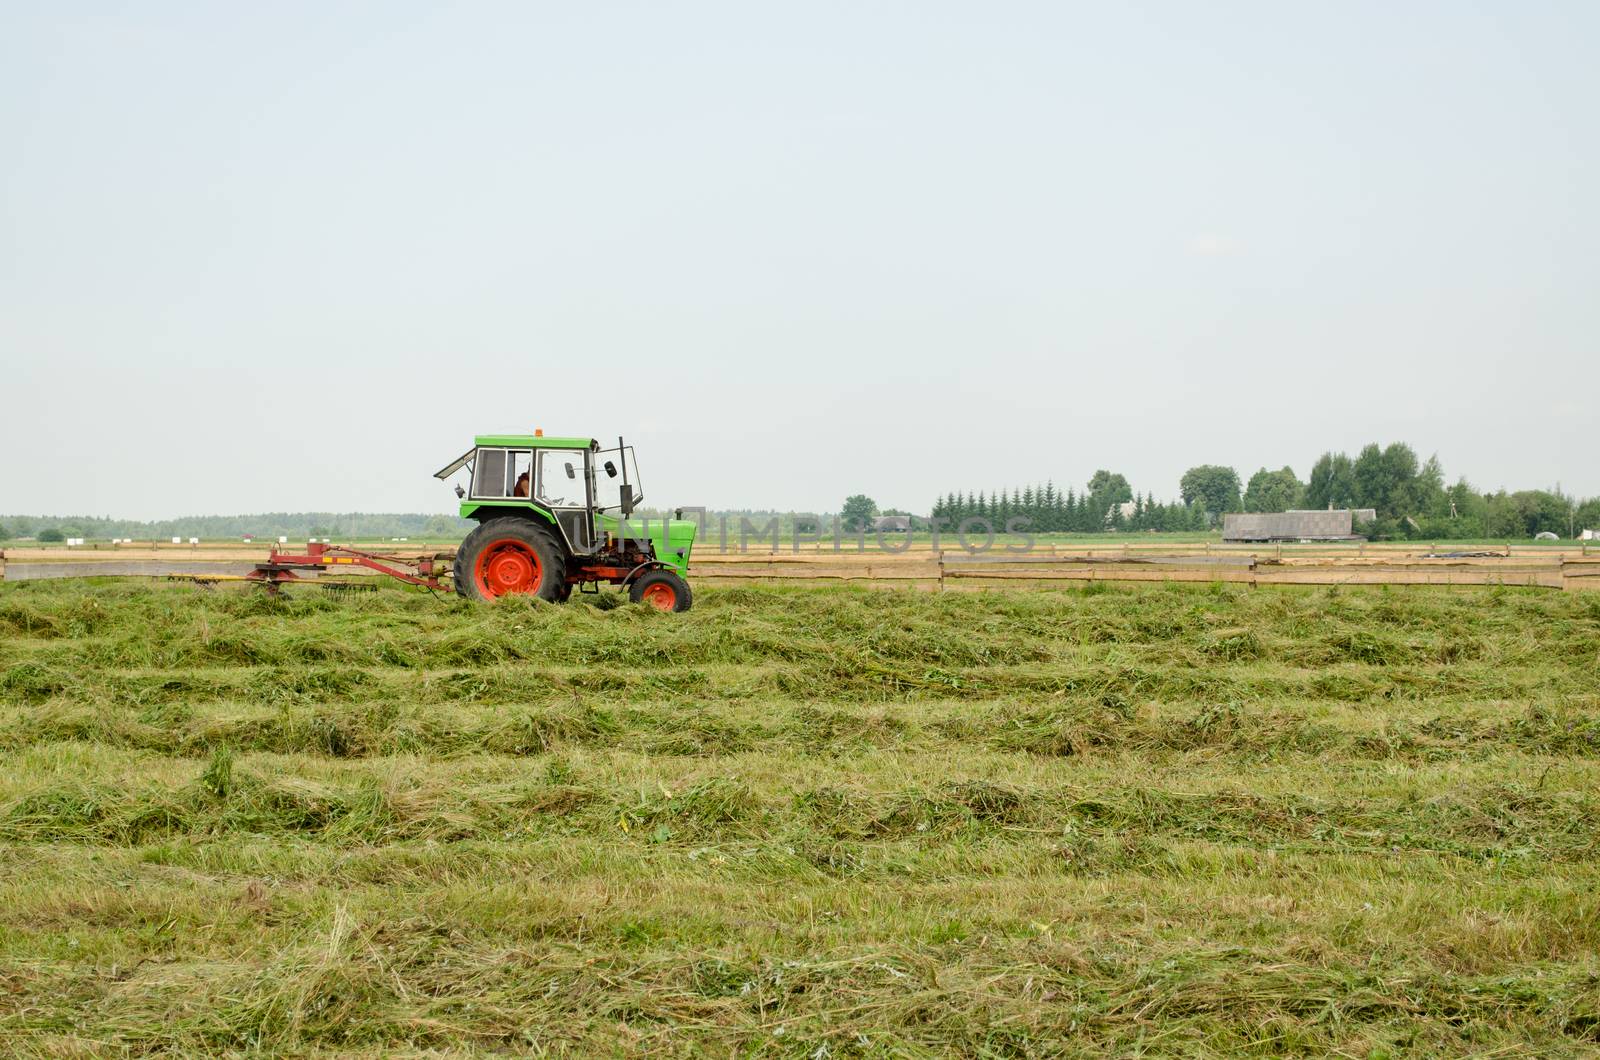 tractor turning raking cut hay with rotary rakes in agriculture field near rural village. Seasonal farm works.